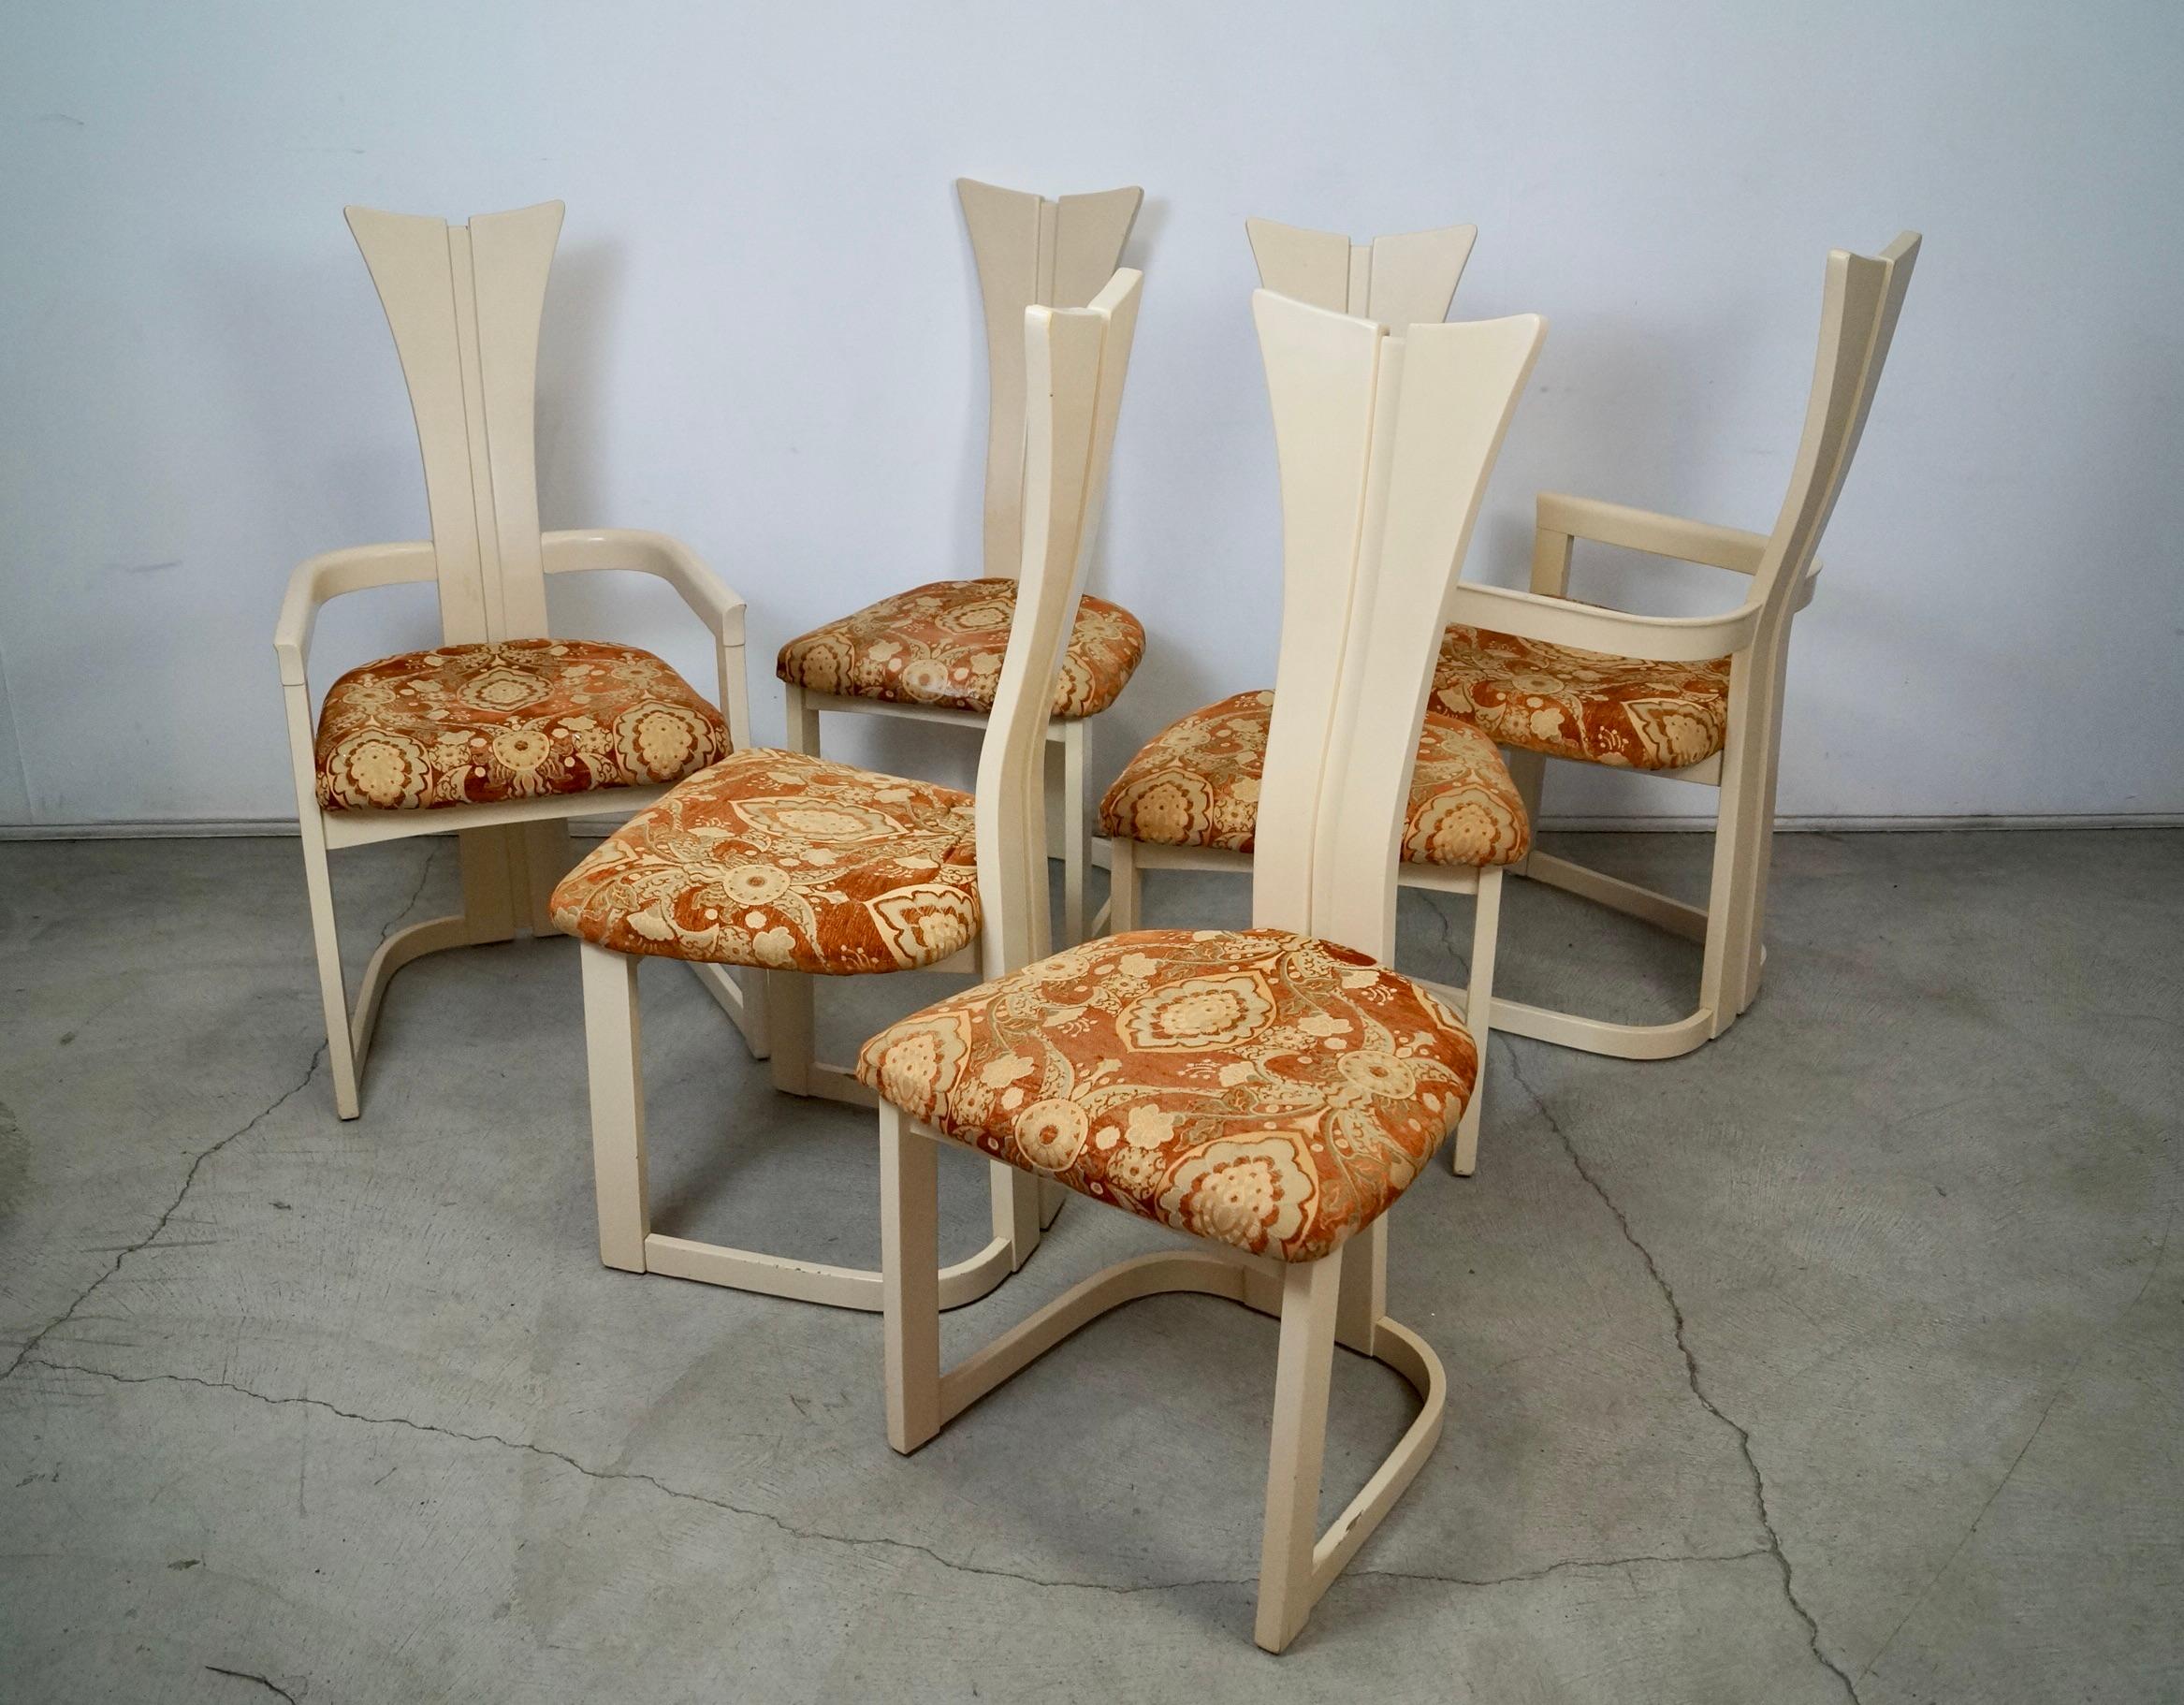 Vintage 1970's Post Modern dining chairs for sale. They have the original off-white cream lacquer, and were previously reupholstered in the 1990's. The cushions show vintage wear, so they're best off being reupholstered. The original lacquer is